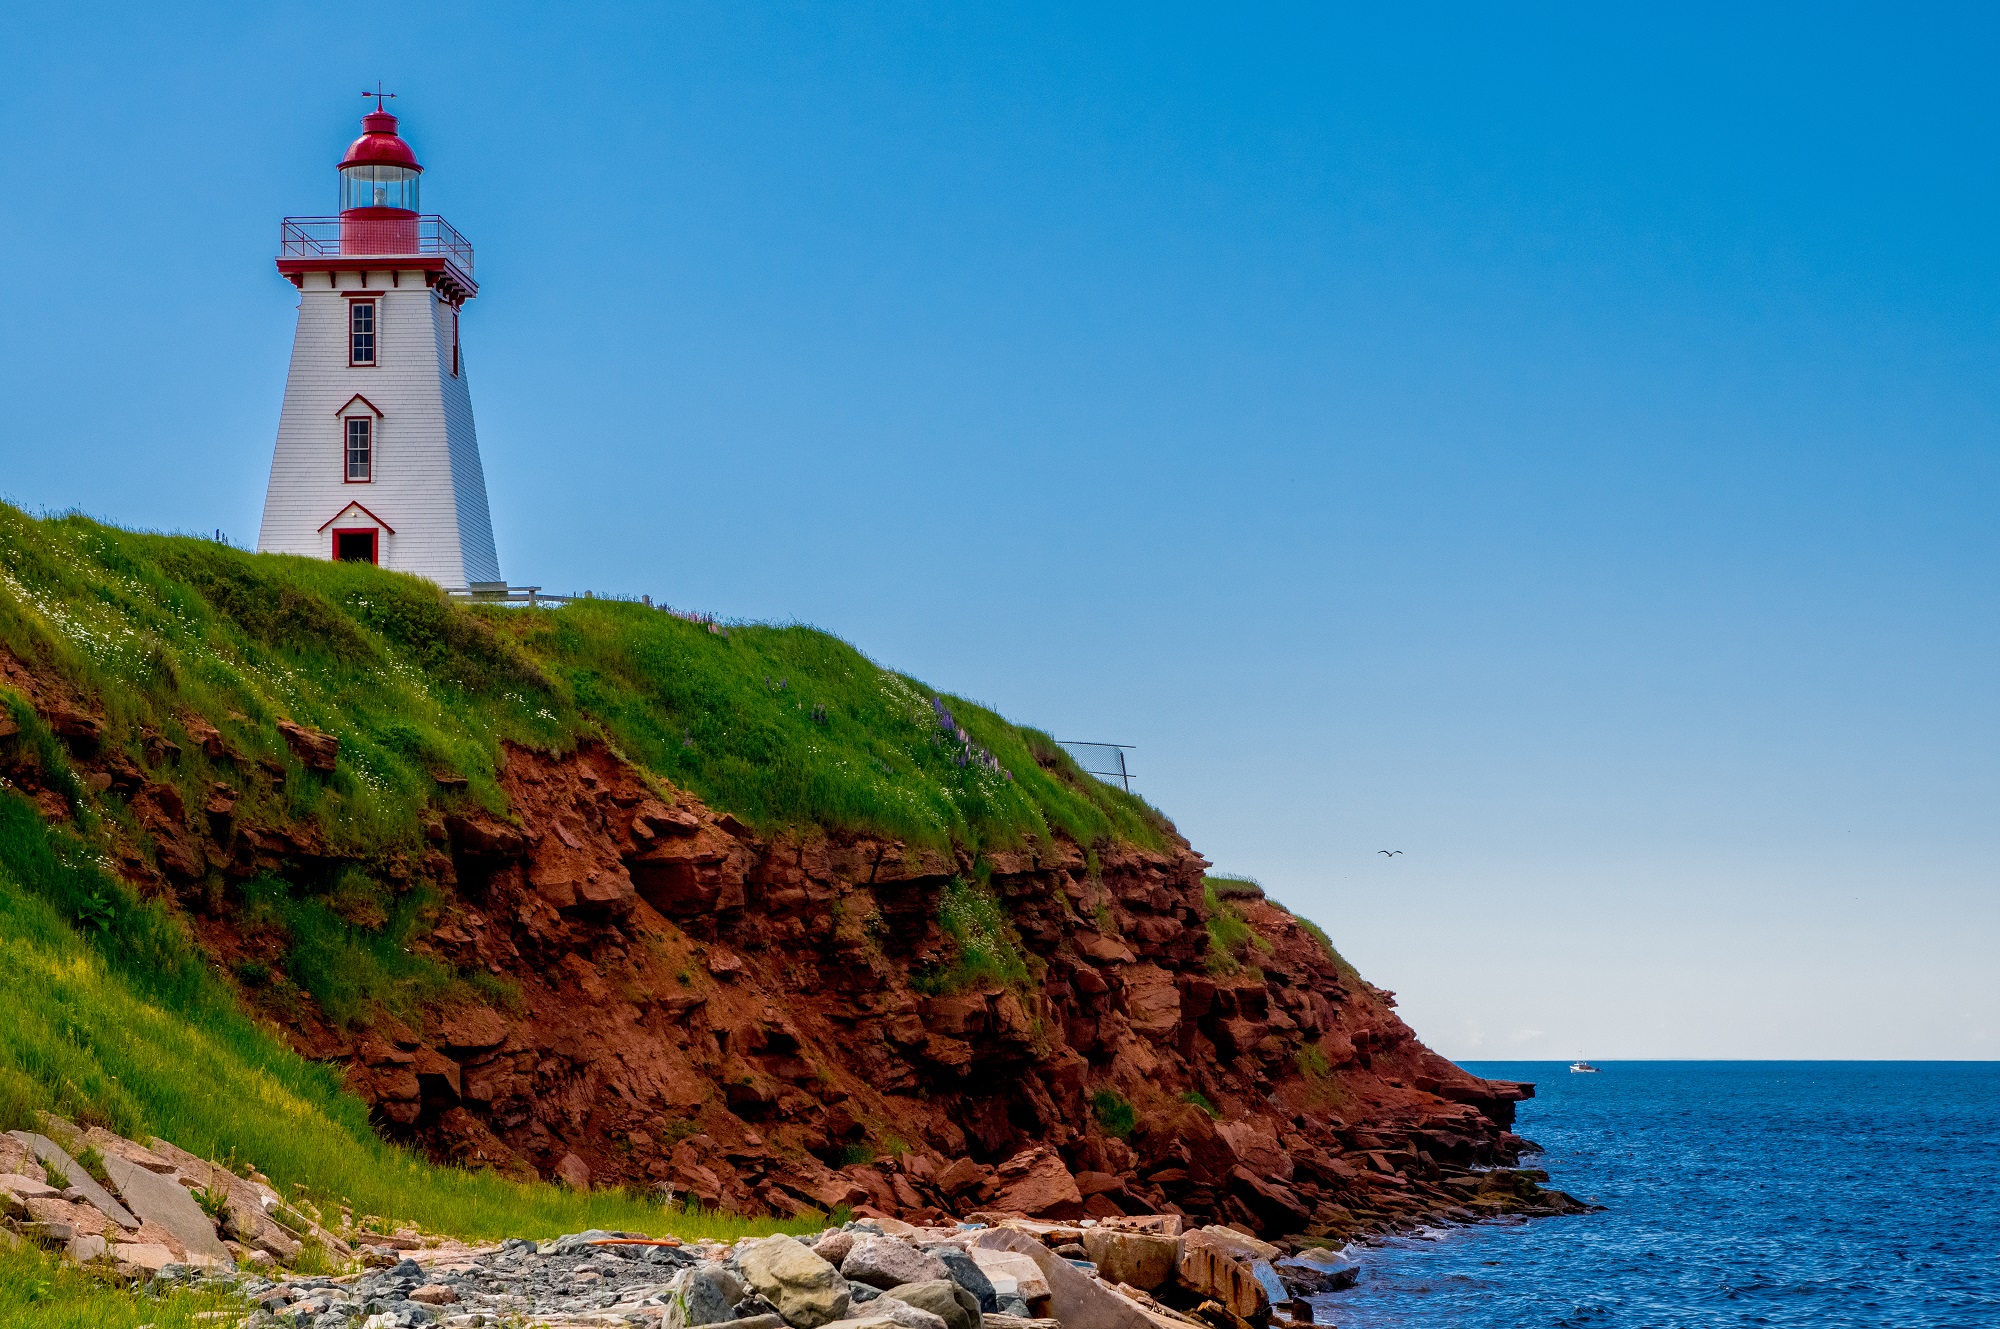 Atlantic Canada Lighthouse on the cliff at Souris, Prince Edward Island